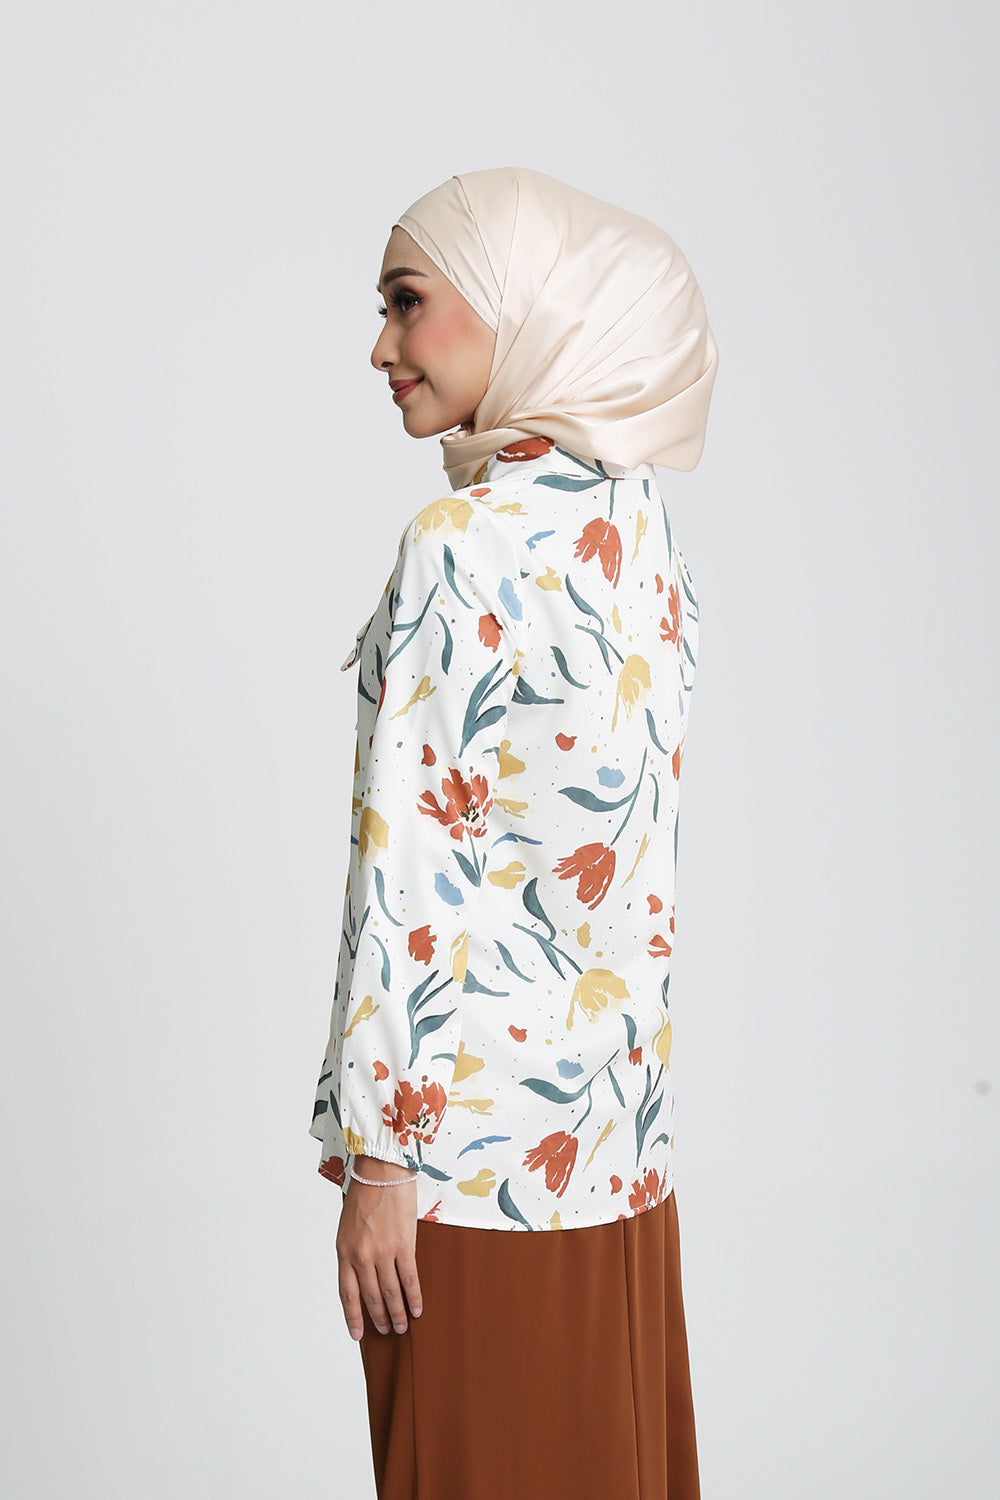 The Reunion Moments Blouse in Floral Prints